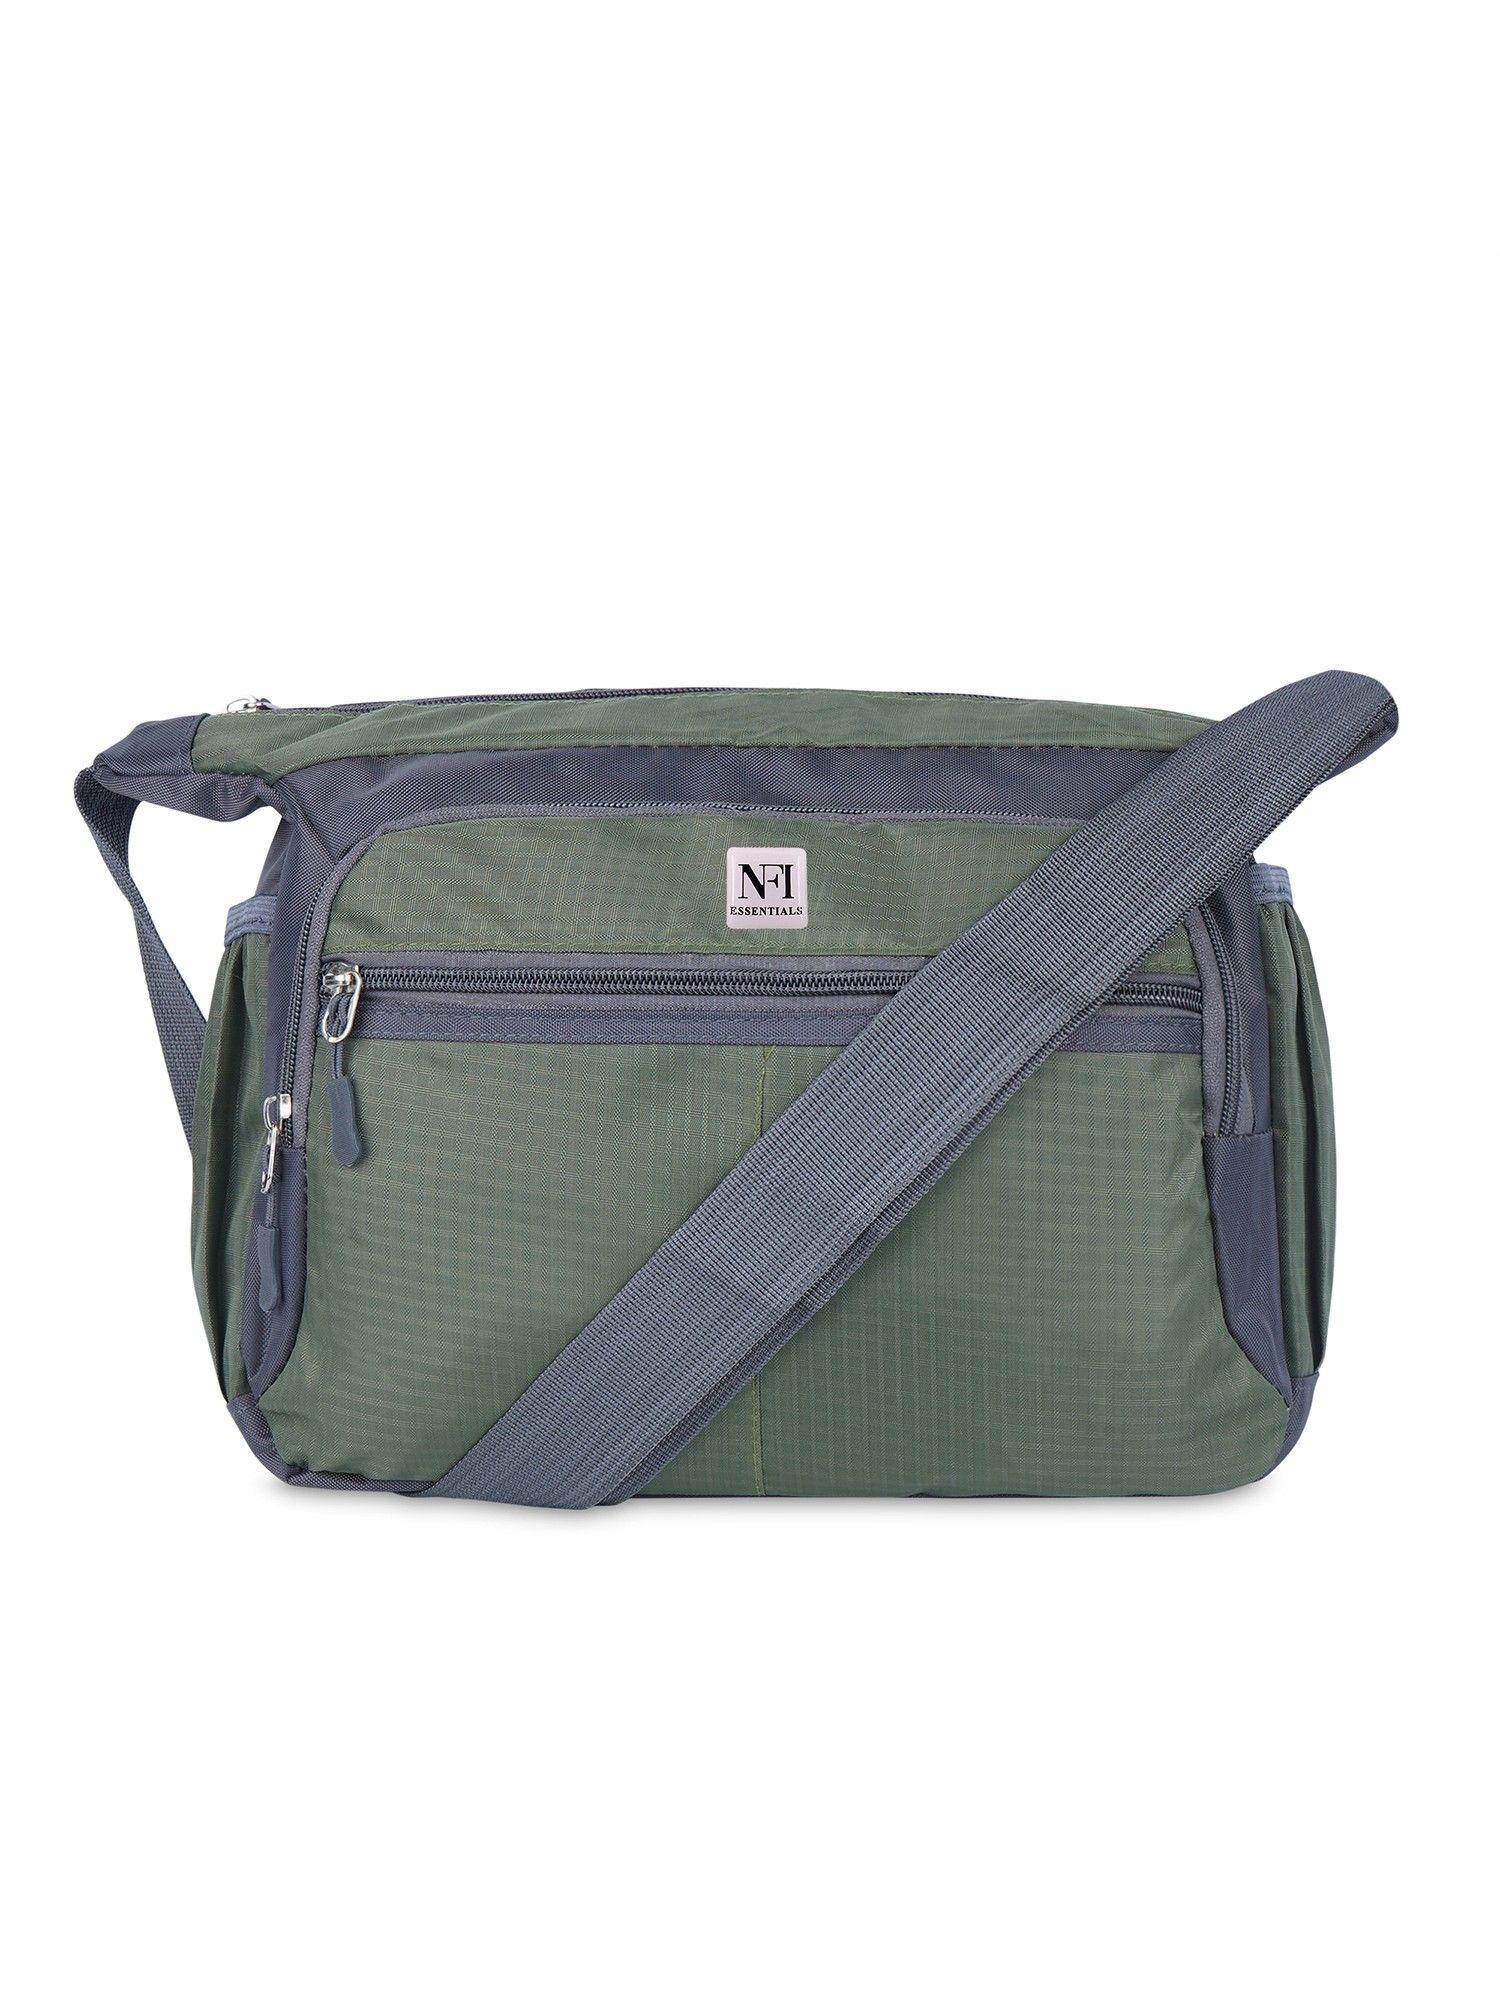 small unisex sling and cross body bag for travelling green